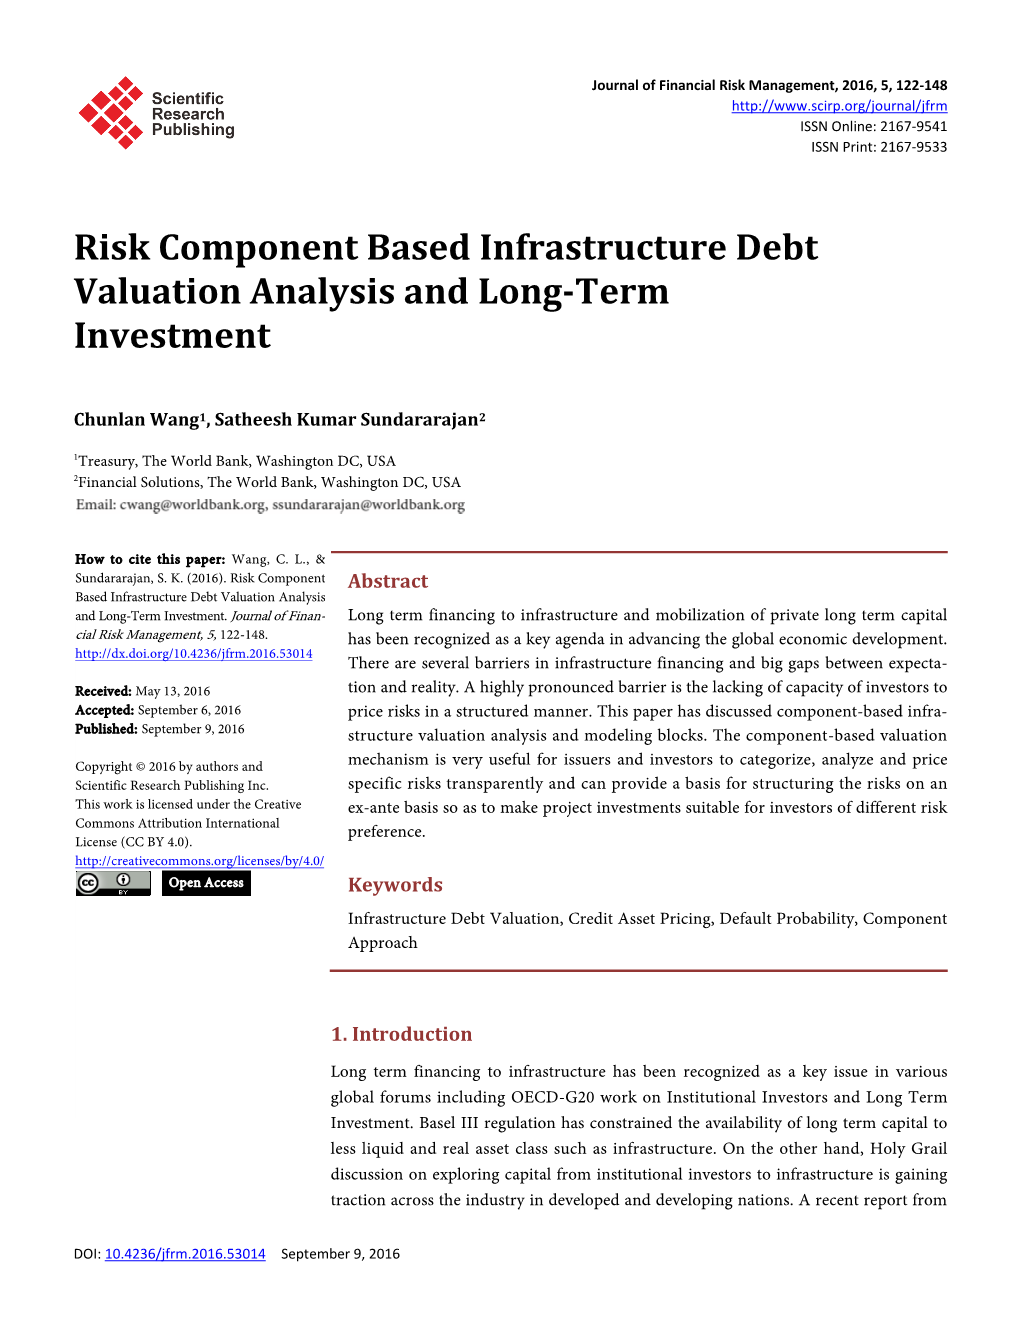 Risk Component Based Infrastructure Debt Valuation Analysis and Long-Term Investment